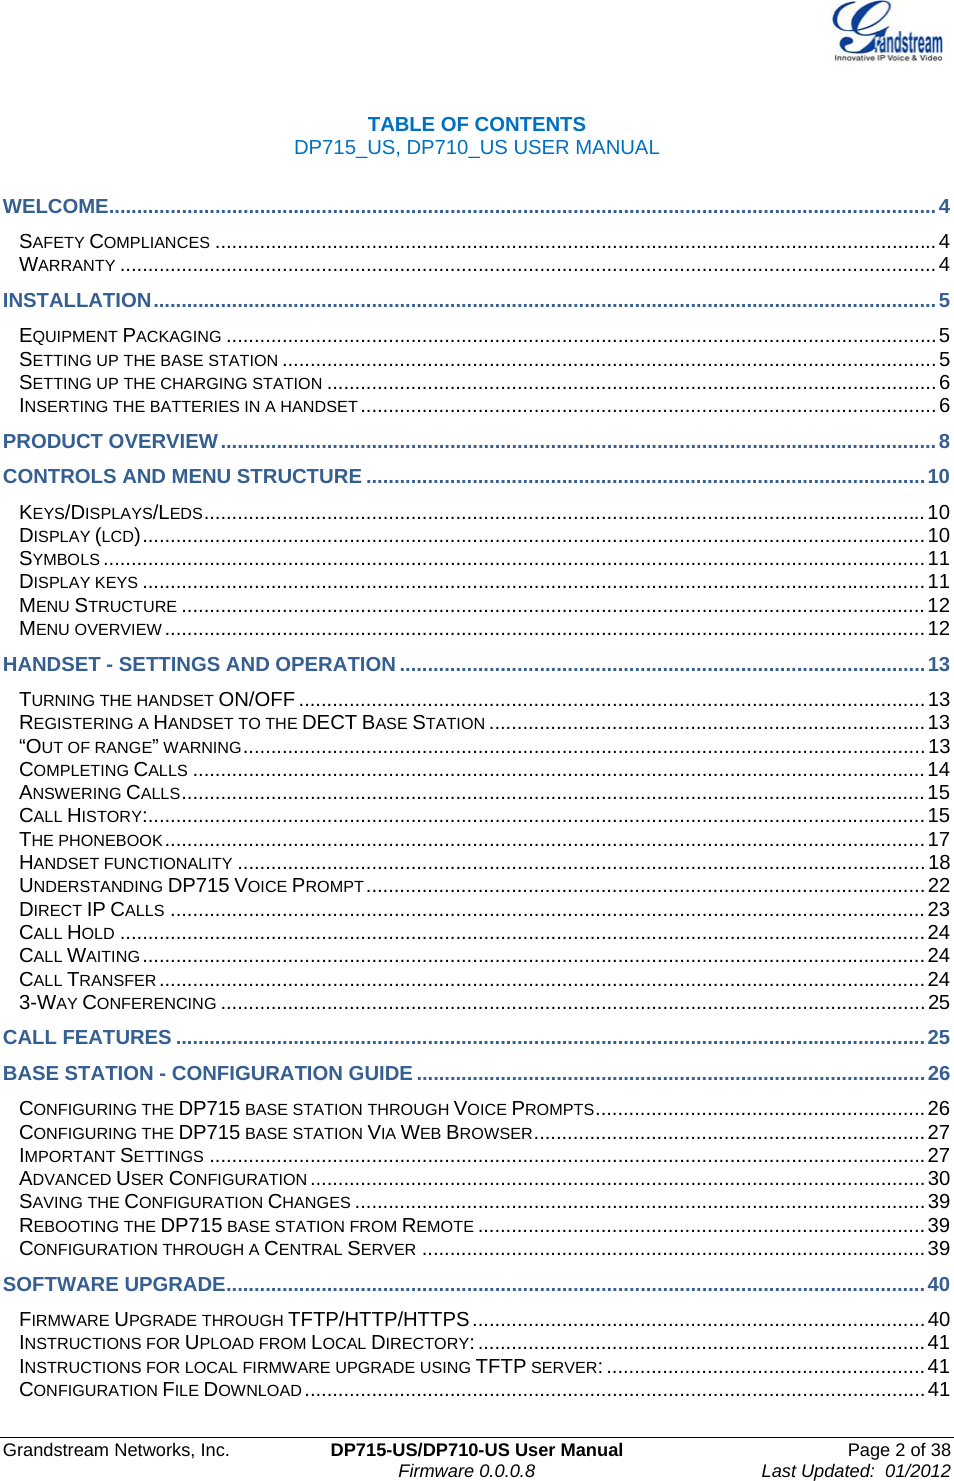  Grandstream Networks, Inc.  DP715-US/DP710-US User Manual  Page 2 of 38                                                                               Firmware 0.0.0.8                                     Last Updated:  01/2012  TABLE OF CONTENTS   DP715_US, DP710_US USER MANUAL  WELCOME....................................................................................................................................................4 SAFETY COMPLIANCES .................................................................................................................................4 WARRANTY ..................................................................................................................................................4 INSTALLATION............................................................................................................................................5 EQUIPMENT PACKAGING ...............................................................................................................................5 SETTING UP THE BASE STATION .....................................................................................................................5 SETTING UP THE CHARGING STATION .............................................................................................................6 INSERTING THE BATTERIES IN A HANDSET.......................................................................................................6 PRODUCT OVERVIEW................................................................................................................................8 CONTROLS AND MENU STRUCTURE ....................................................................................................10 KEYS/DISPLAYS/LEDS.................................................................................................................................10 DISPLAY (LCD)............................................................................................................................................10 SYMBOLS ...................................................................................................................................................11 DISPLAY KEYS ............................................................................................................................................11 MENU STRUCTURE .....................................................................................................................................12 MENU OVERVIEW ........................................................................................................................................12 HANDSET - SETTINGS AND OPERATION ..............................................................................................13 TURNING THE HANDSET ON/OFF ................................................................................................................13 REGISTERING A HANDSET TO THE DECT BASE STATION ..............................................................................13 “OUT OF RANGE” WARNING..........................................................................................................................13 COMPLETING CALLS ...................................................................................................................................14 ANSWERING CALLS.....................................................................................................................................15 CALL HISTORY:...........................................................................................................................................15 THE PHONEBOOK........................................................................................................................................17 HANDSET FUNCTIONALITY ...........................................................................................................................18 UNDERSTANDING DP715 VOICE PROMPT....................................................................................................22 DIRECT IP CALLS .......................................................................................................................................23 CALL HOLD ................................................................................................................................................24 CALL WAITING ............................................................................................................................................24 CALL TRANSFER.........................................................................................................................................24 3-WAY CONFERENCING ..............................................................................................................................25 CALL FEATURES ......................................................................................................................................25 BASE STATION - CONFIGURATION GUIDE ...........................................................................................26 CONFIGURING THE DP715 BASE STATION THROUGH VOICE PROMPTS...........................................................26 CONFIGURING THE DP715 BASE STATION VIA WEB BROWSER......................................................................27 IMPORTANT SETTINGS ................................................................................................................................27 ADVANCED USER CONFIGURATION ..............................................................................................................30 SAVING THE CONFIGURATION CHANGES ......................................................................................................39 REBOOTING THE DP715 BASE STATION FROM REMOTE ................................................................................39 CONFIGURATION THROUGH A CENTRAL SERVER ..........................................................................................39 SOFTWARE UPGRADE.............................................................................................................................40 FIRMWARE UPGRADE THROUGH TFTP/HTTP/HTTPS.................................................................................40 INSTRUCTIONS FOR UPLOAD FROM LOCAL DIRECTORY:................................................................................41 INSTRUCTIONS FOR LOCAL FIRMWARE UPGRADE USING TFTP SERVER: .........................................................41 CONFIGURATION FILE DOWNLOAD ...............................................................................................................41 